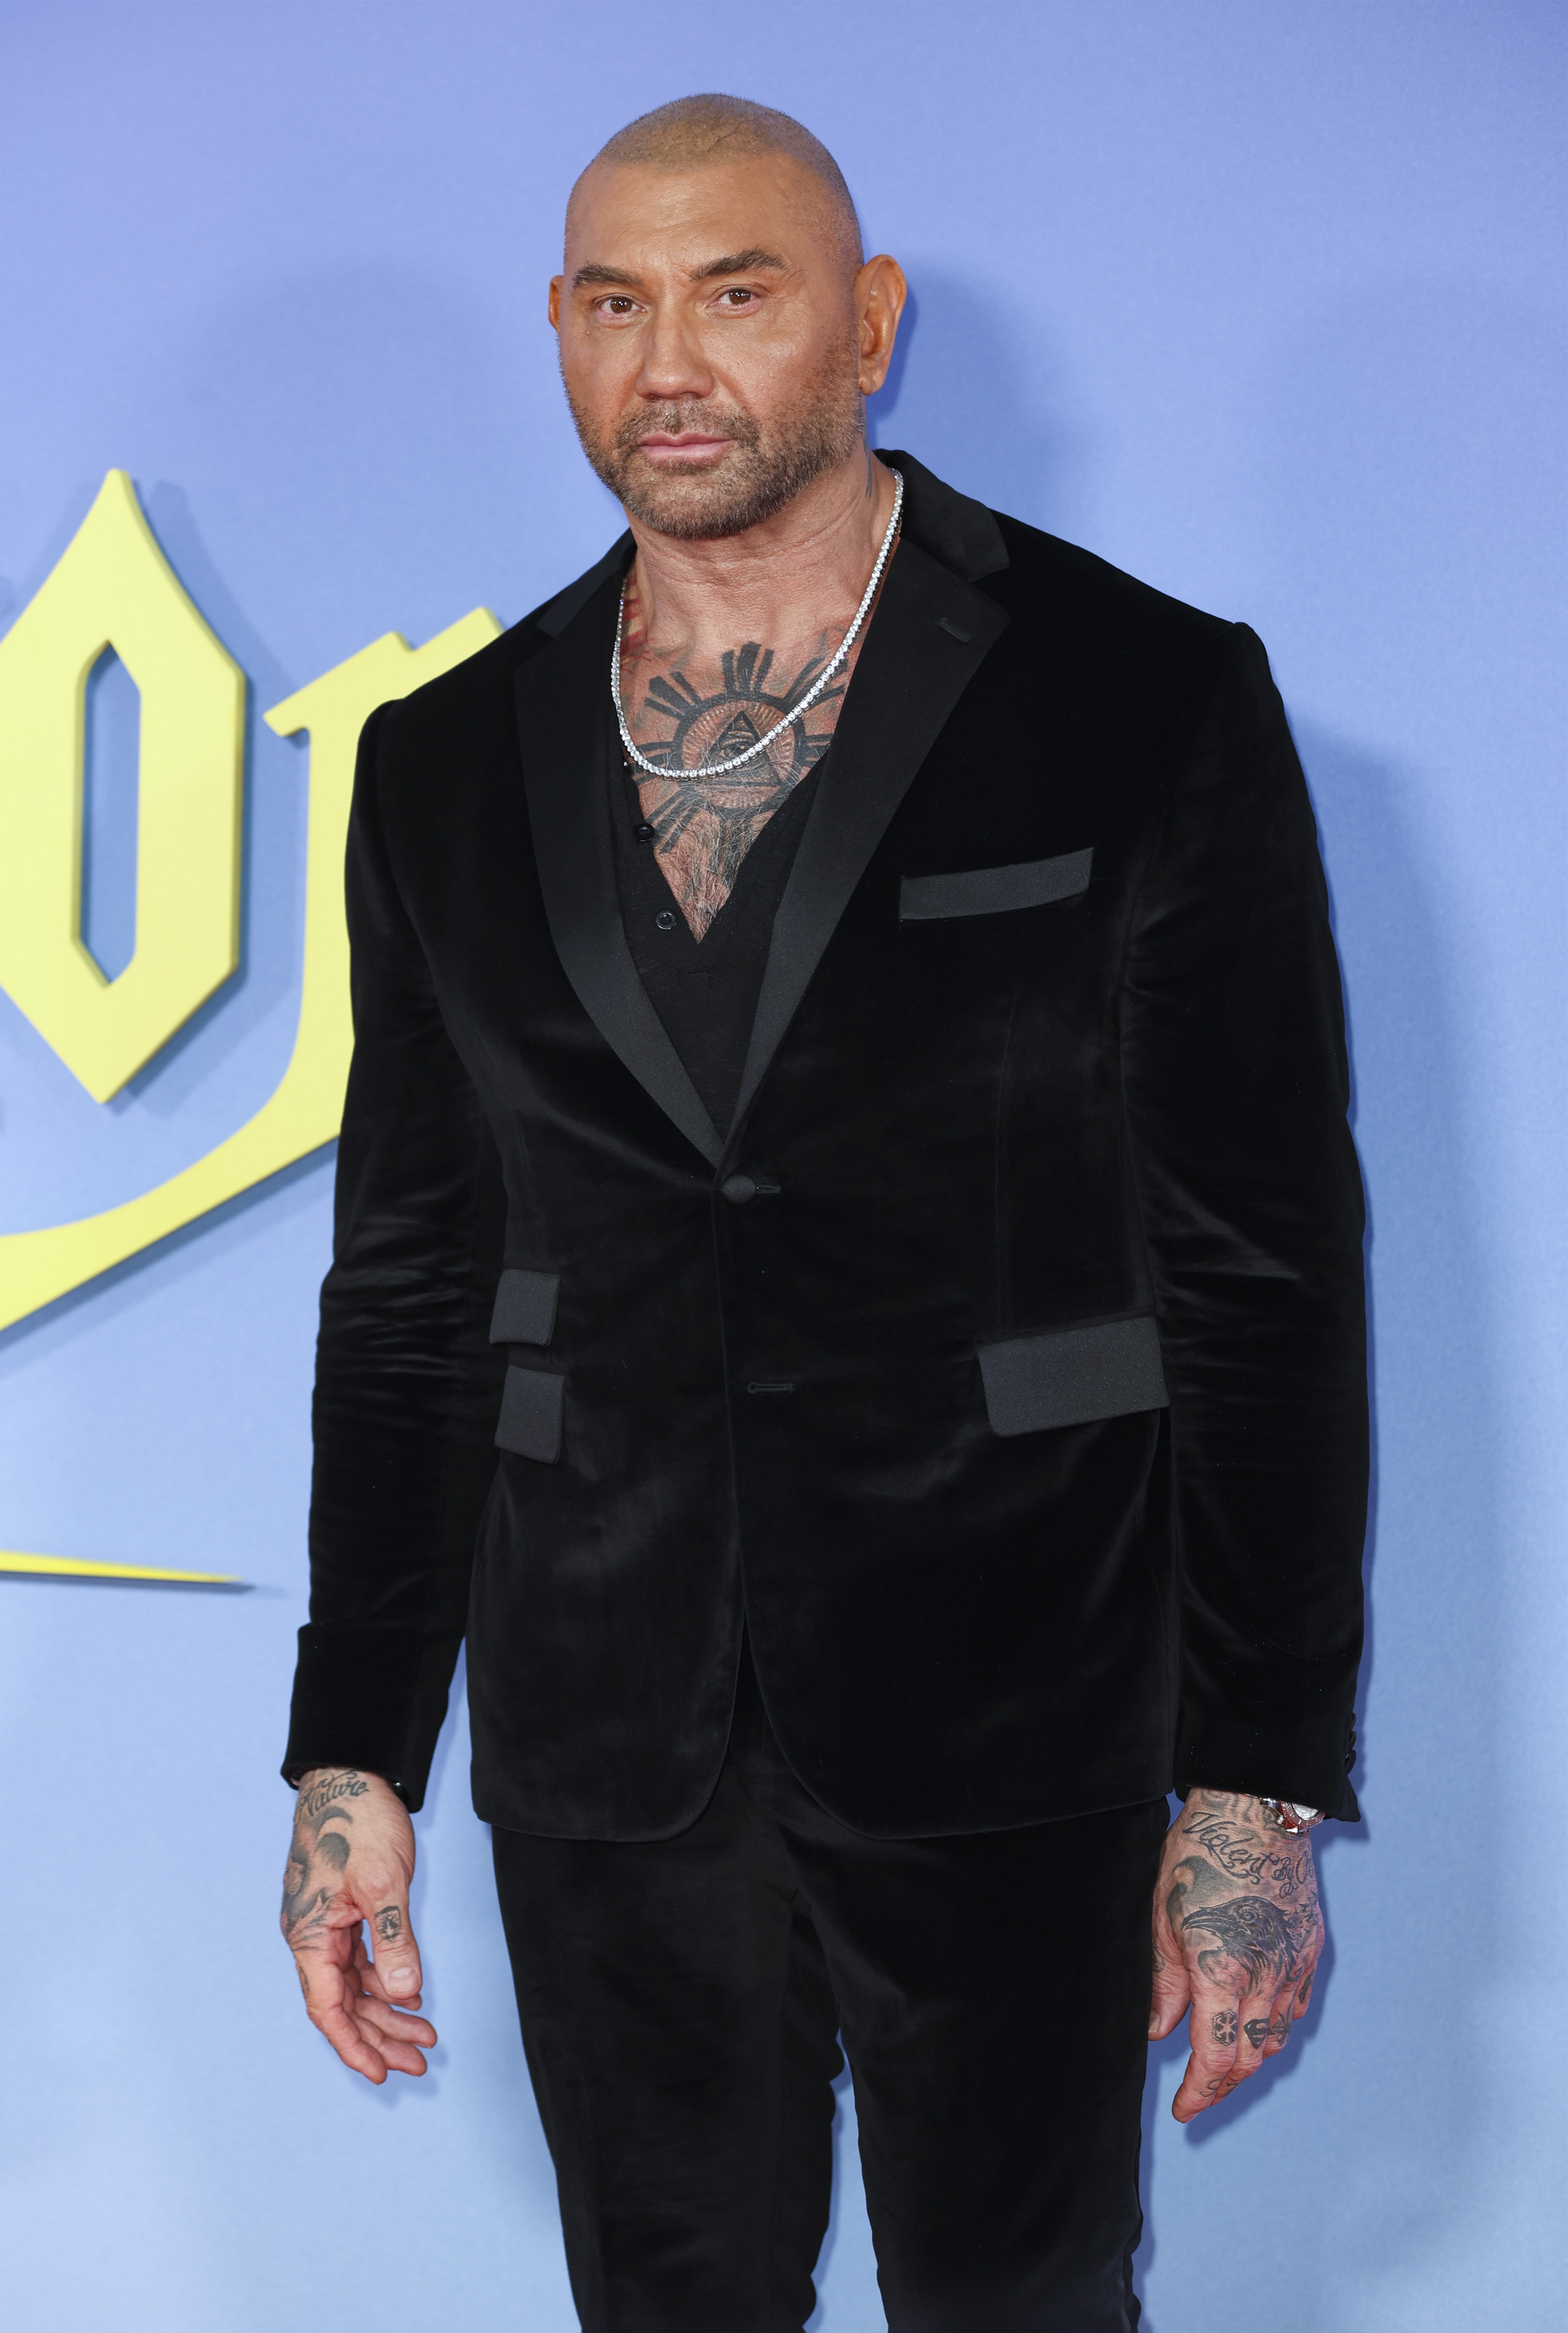 Dave Bautista attends the "Glass Onion: A Knives Out Mystery" European Premiere Closing Night Gala during the 66th BFI London Film Festival at The Royal Festival Hall on October 16, 2022, in London, England. | Source: Getty Images